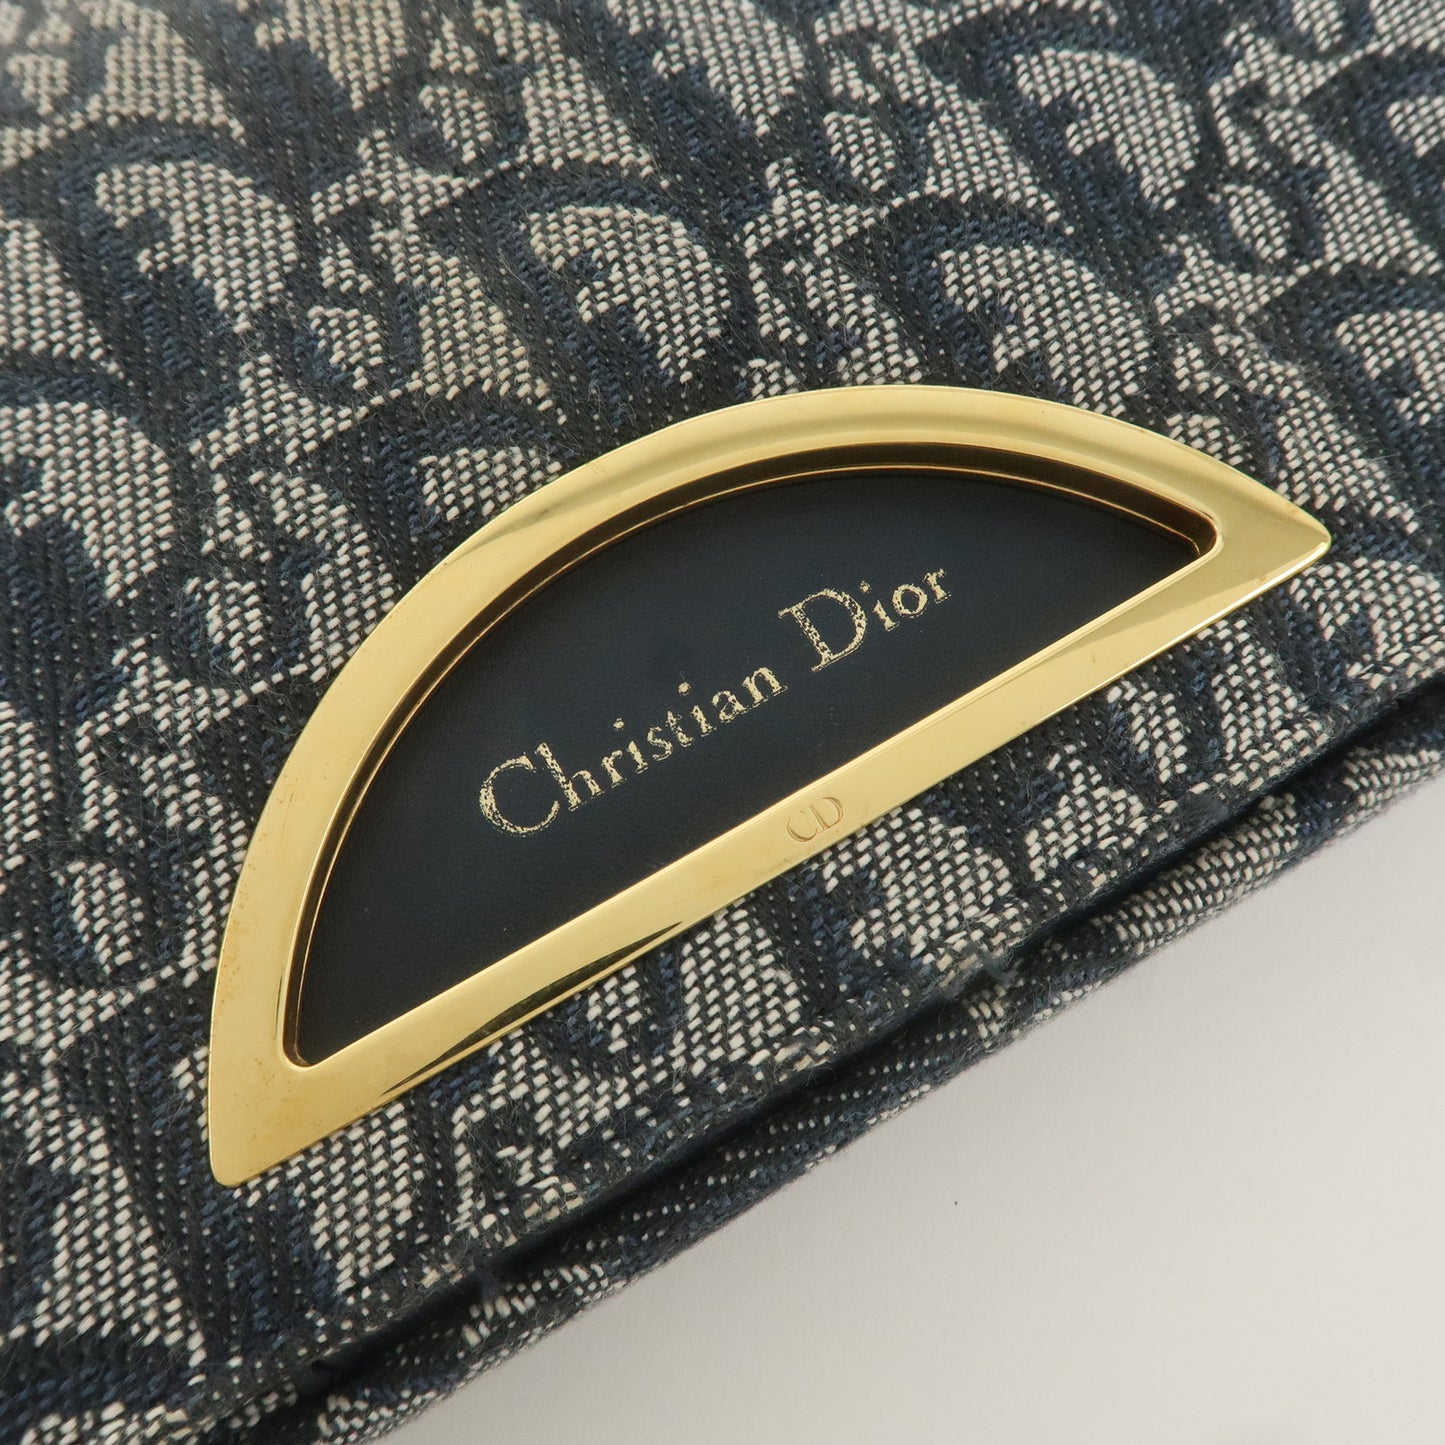 Christian Dior Trotter Maris Pearl Canvas Leather Bag Navy